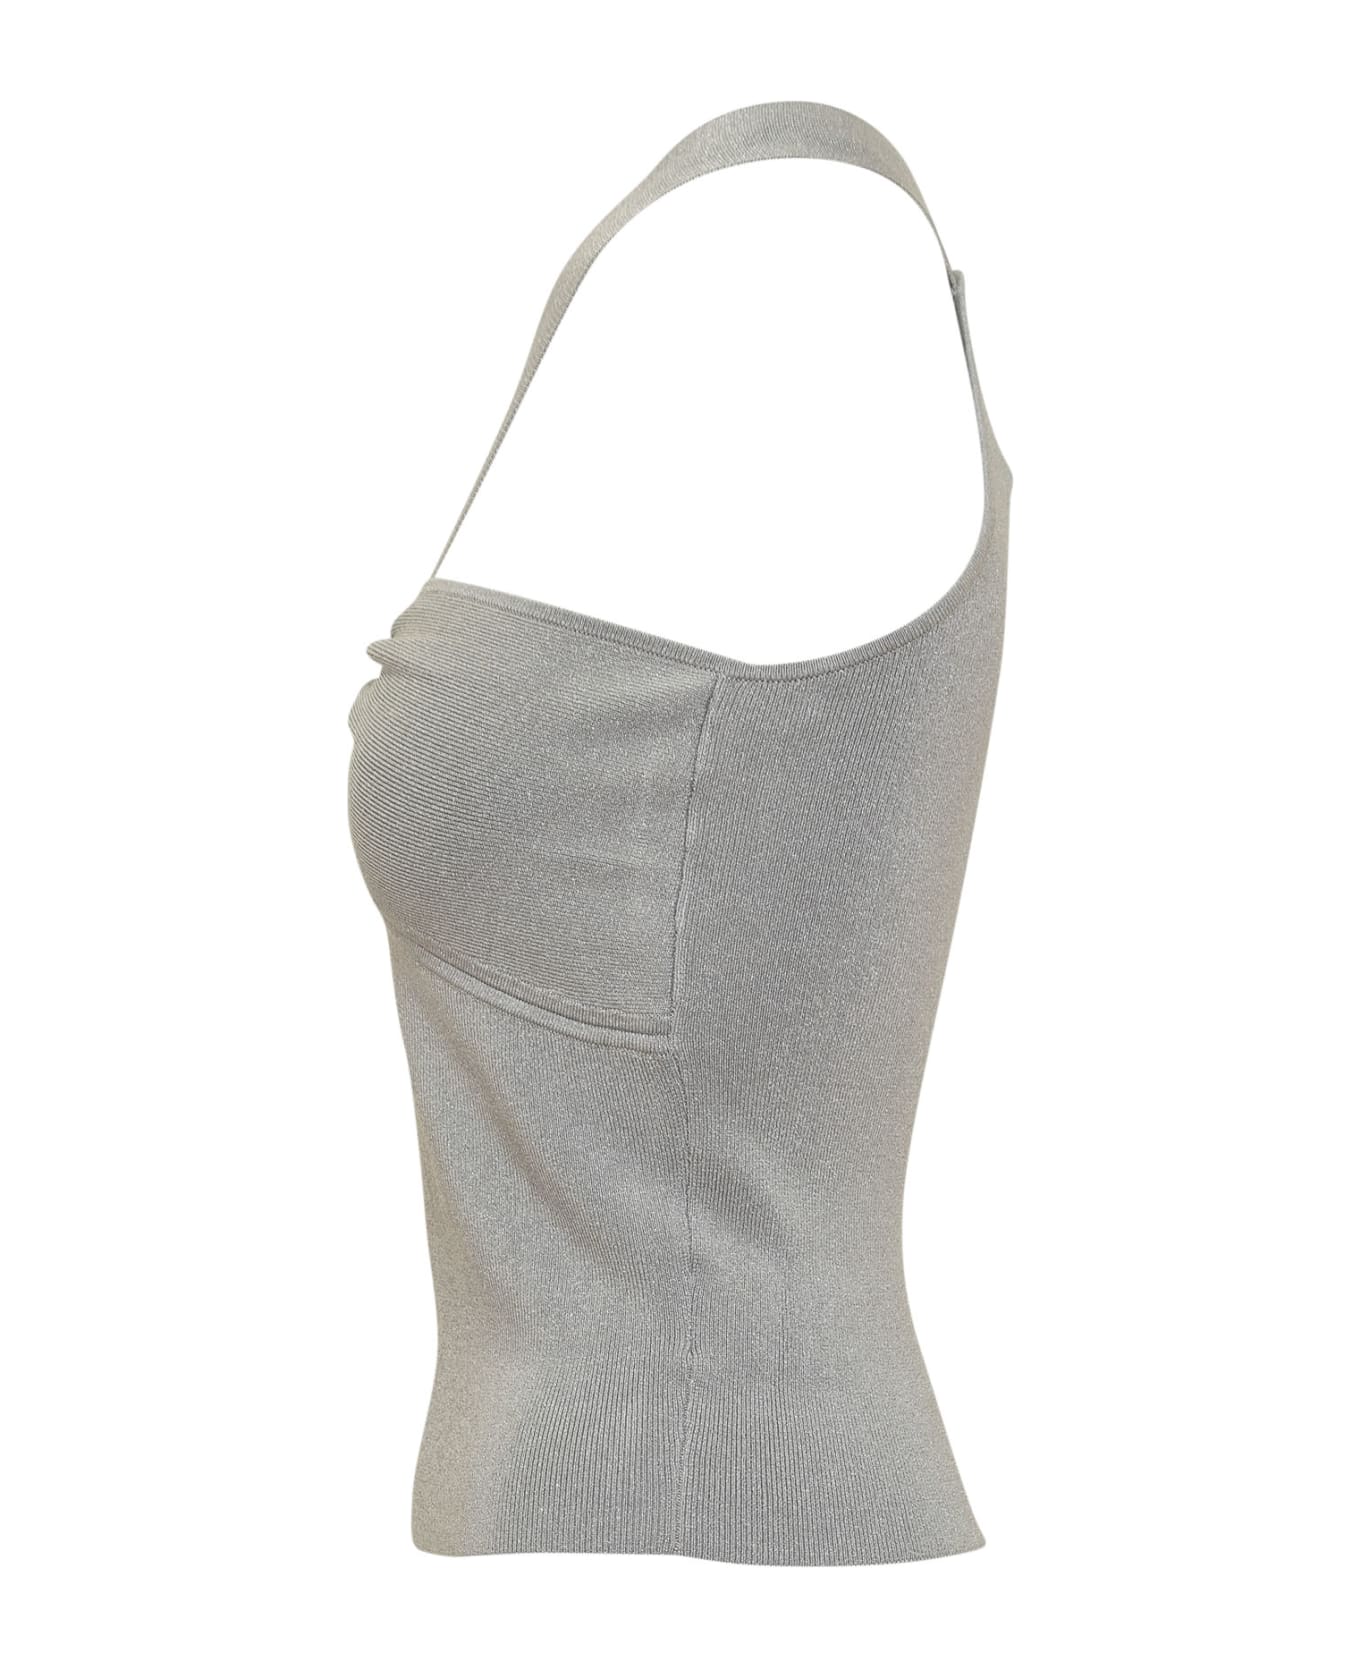 Michael Kors Collection Top With Drop Opening - Silver